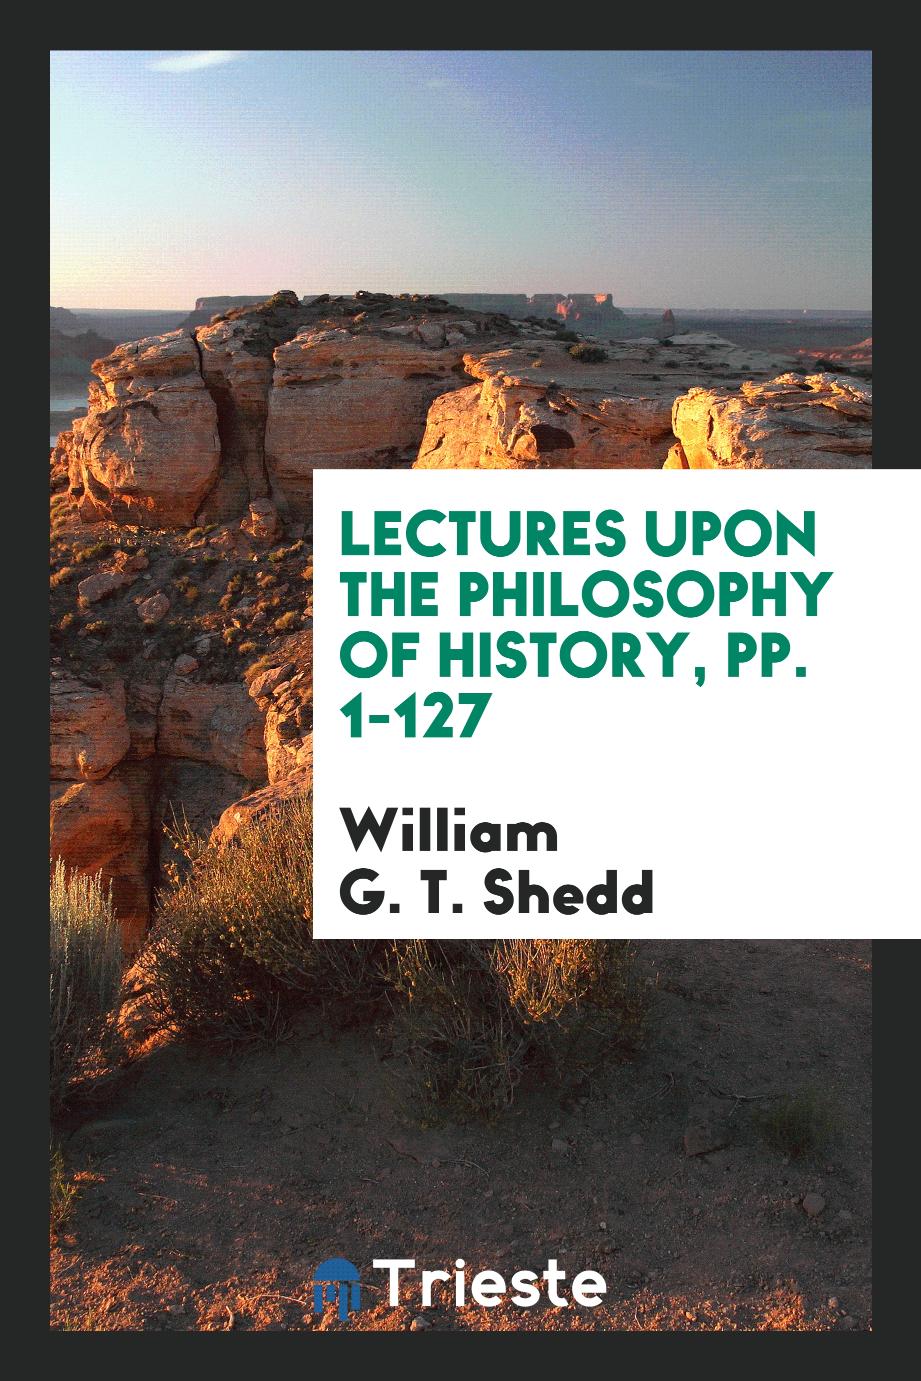 Lectures upon the Philosophy of History, pp. 1-127